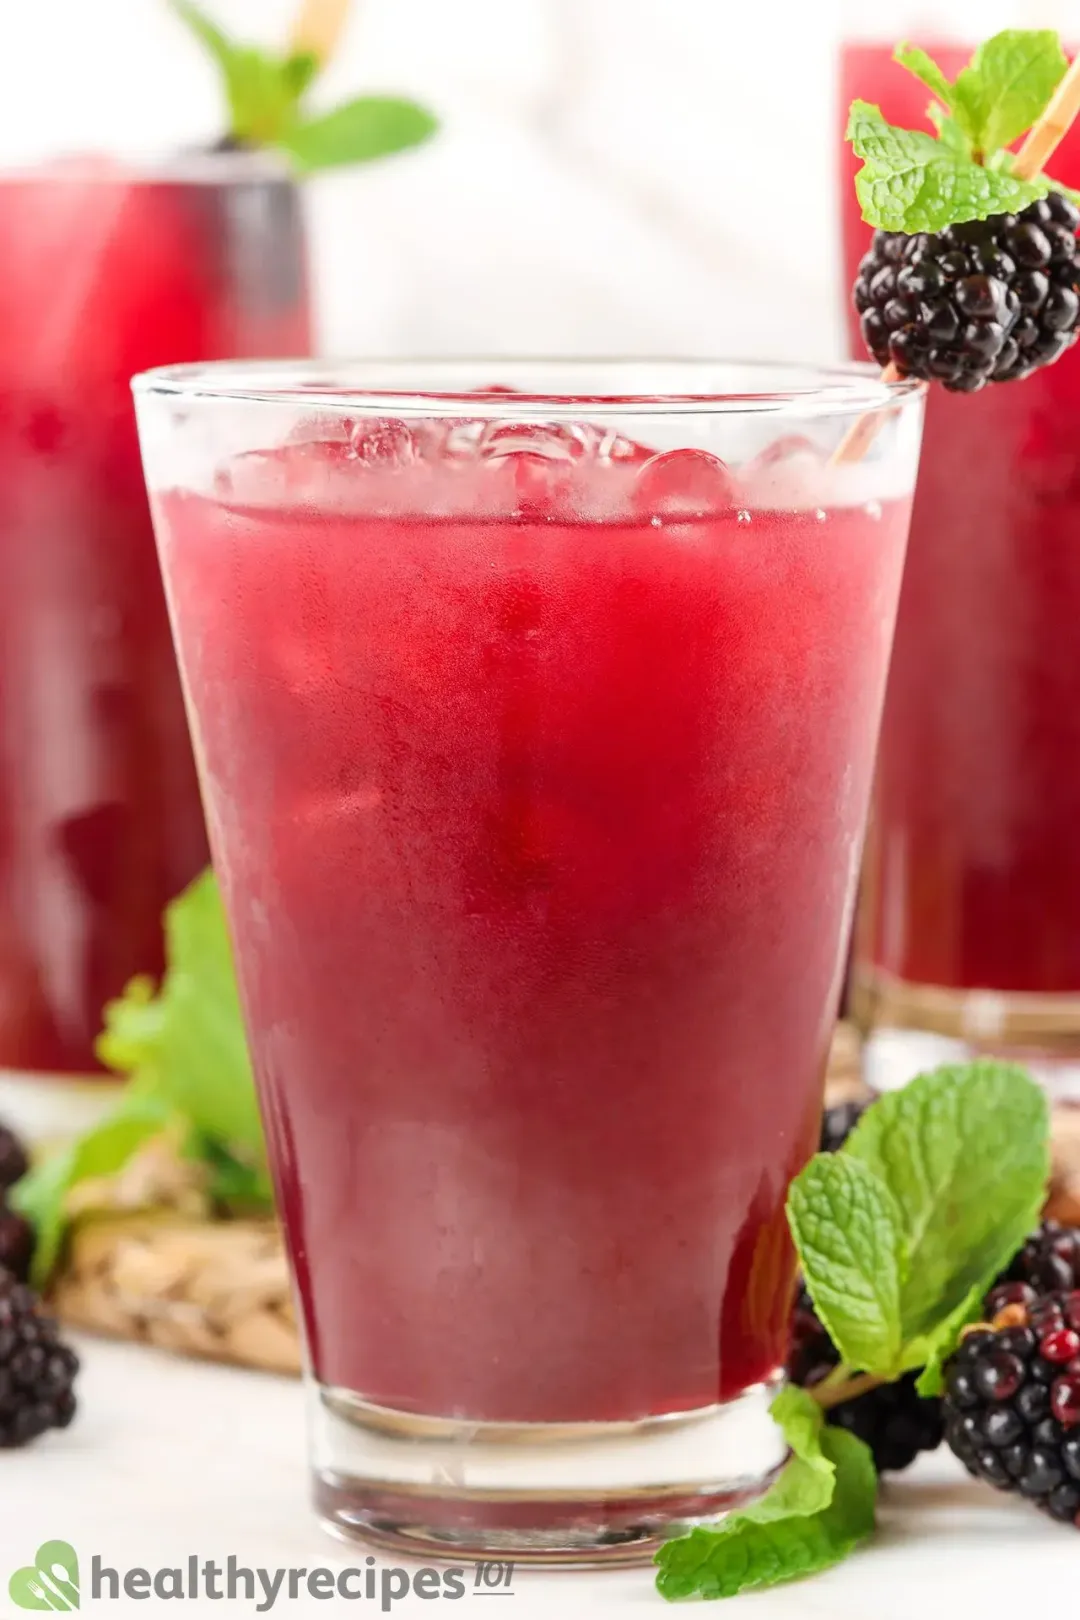 Three iced glasses of pink blackberry juice drinks, garnished with mints and blackberries